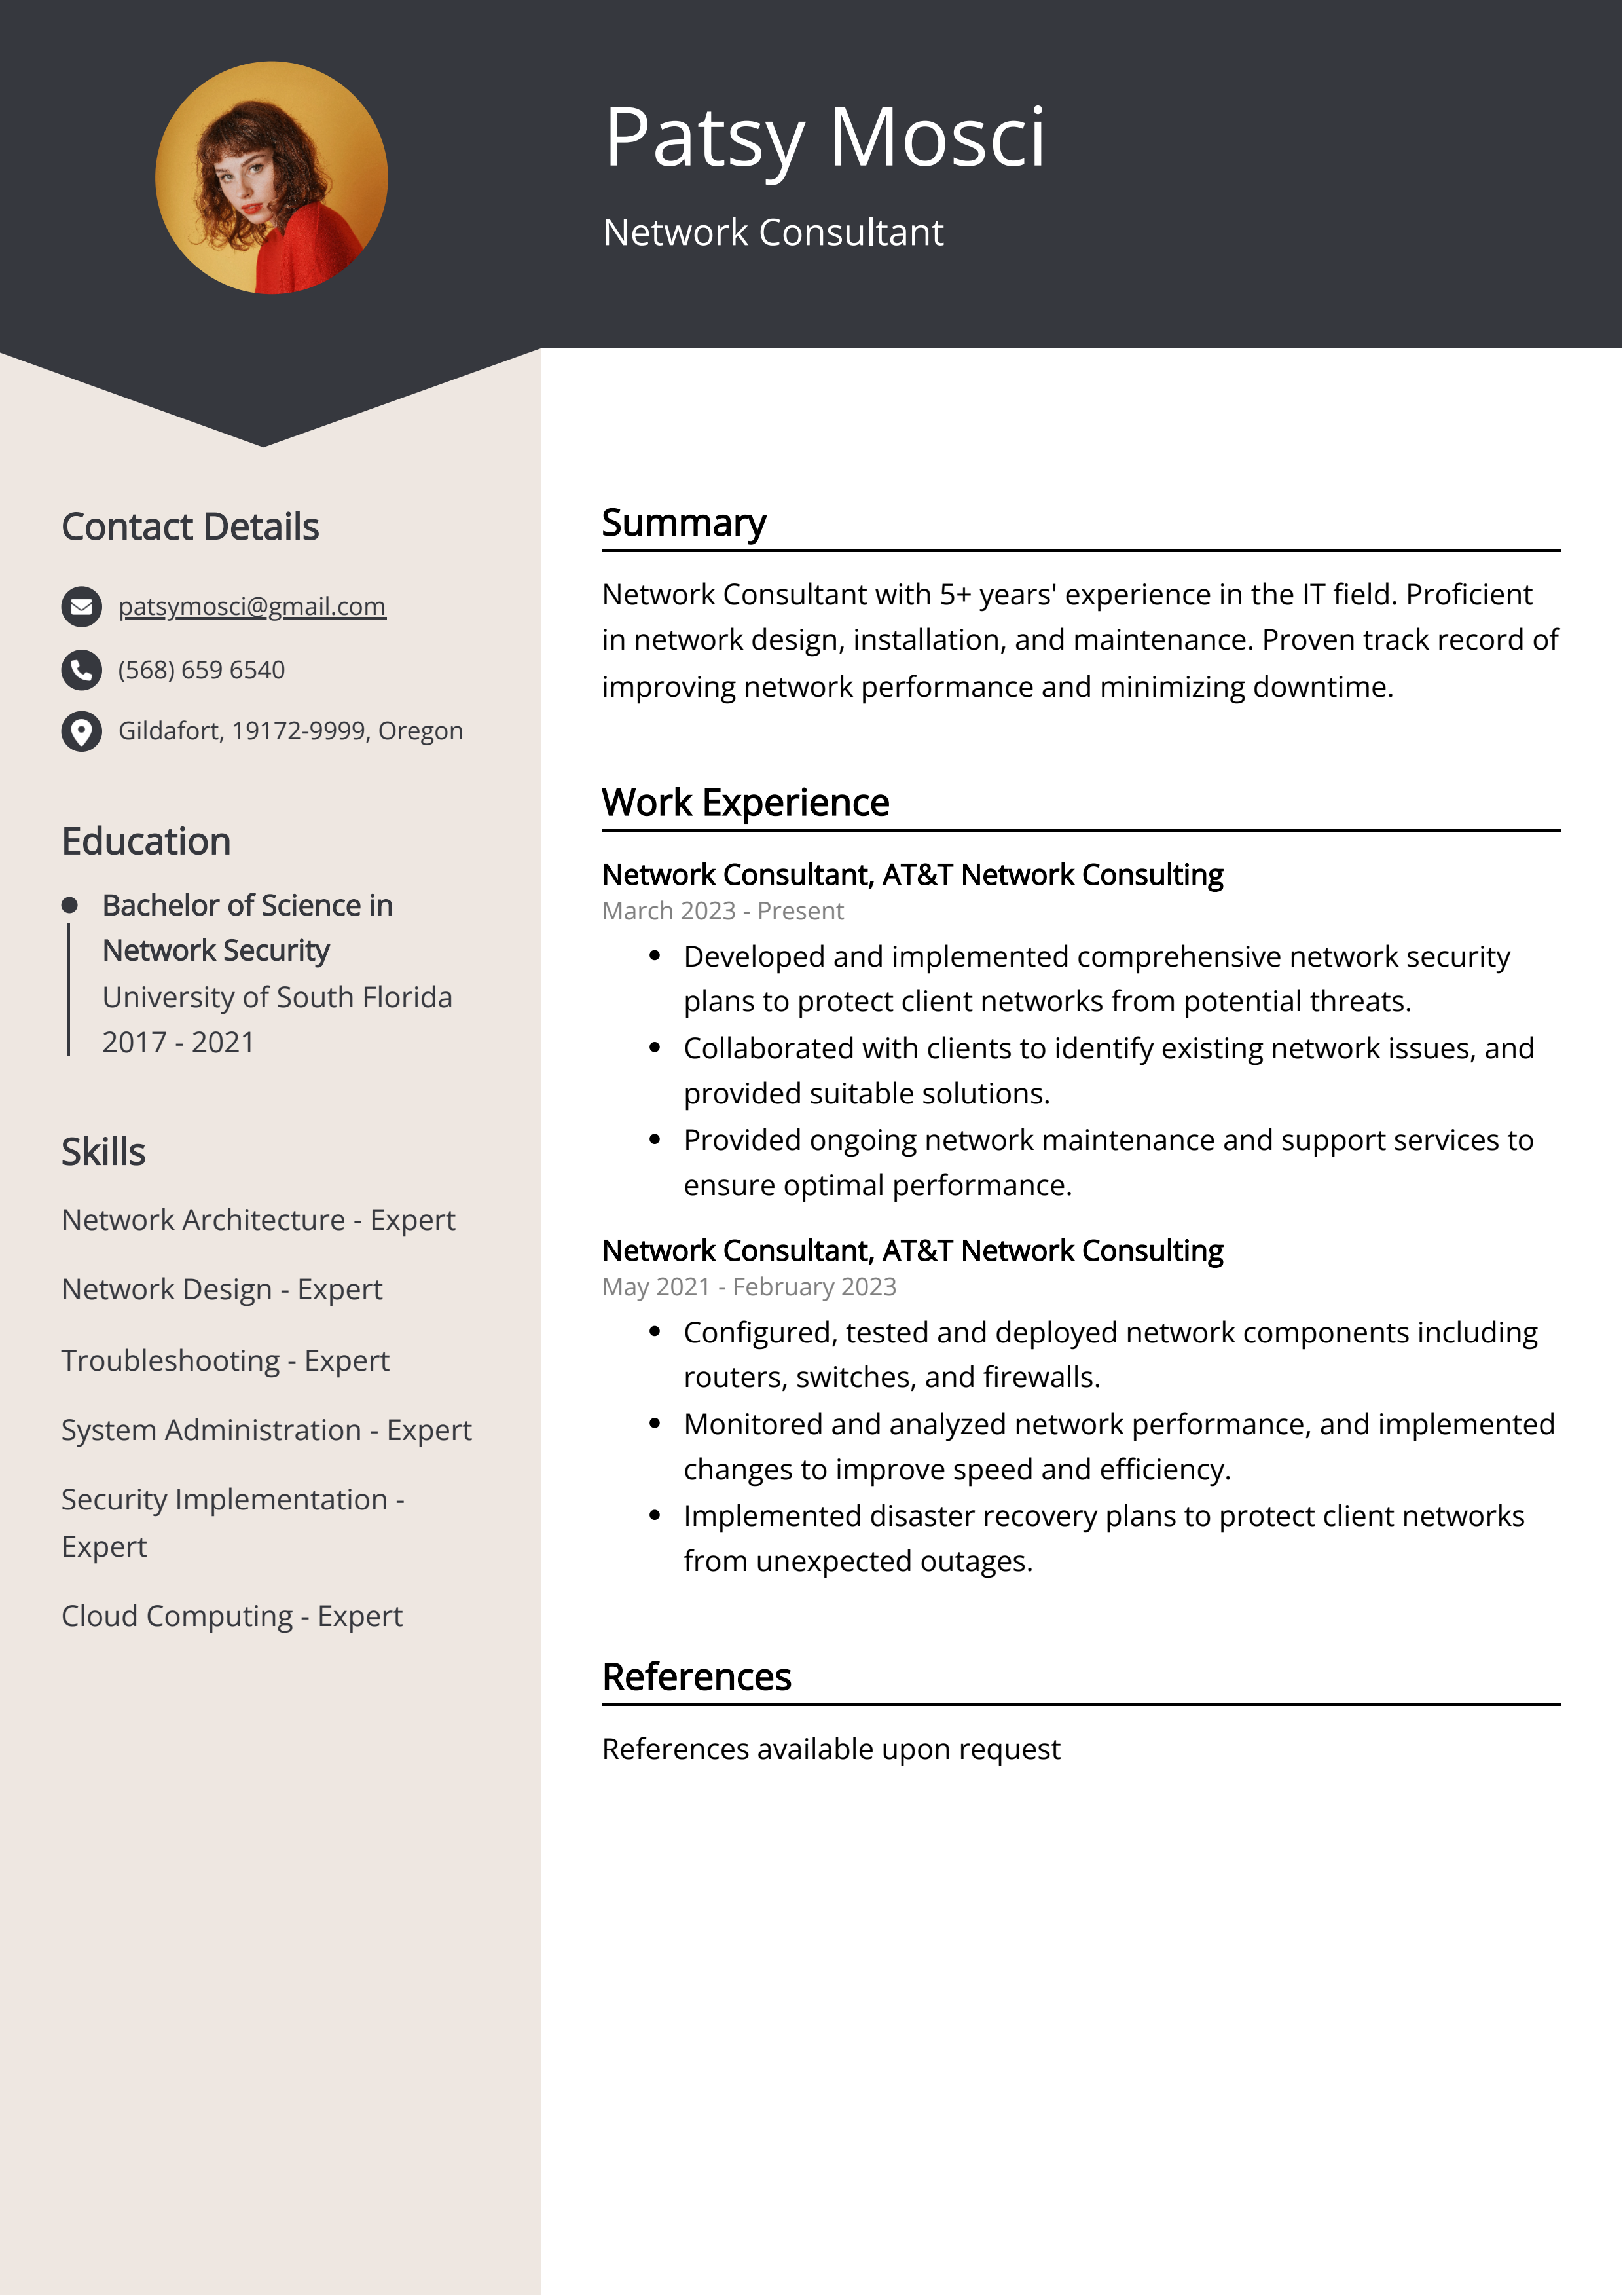 Network Consultant CV Example